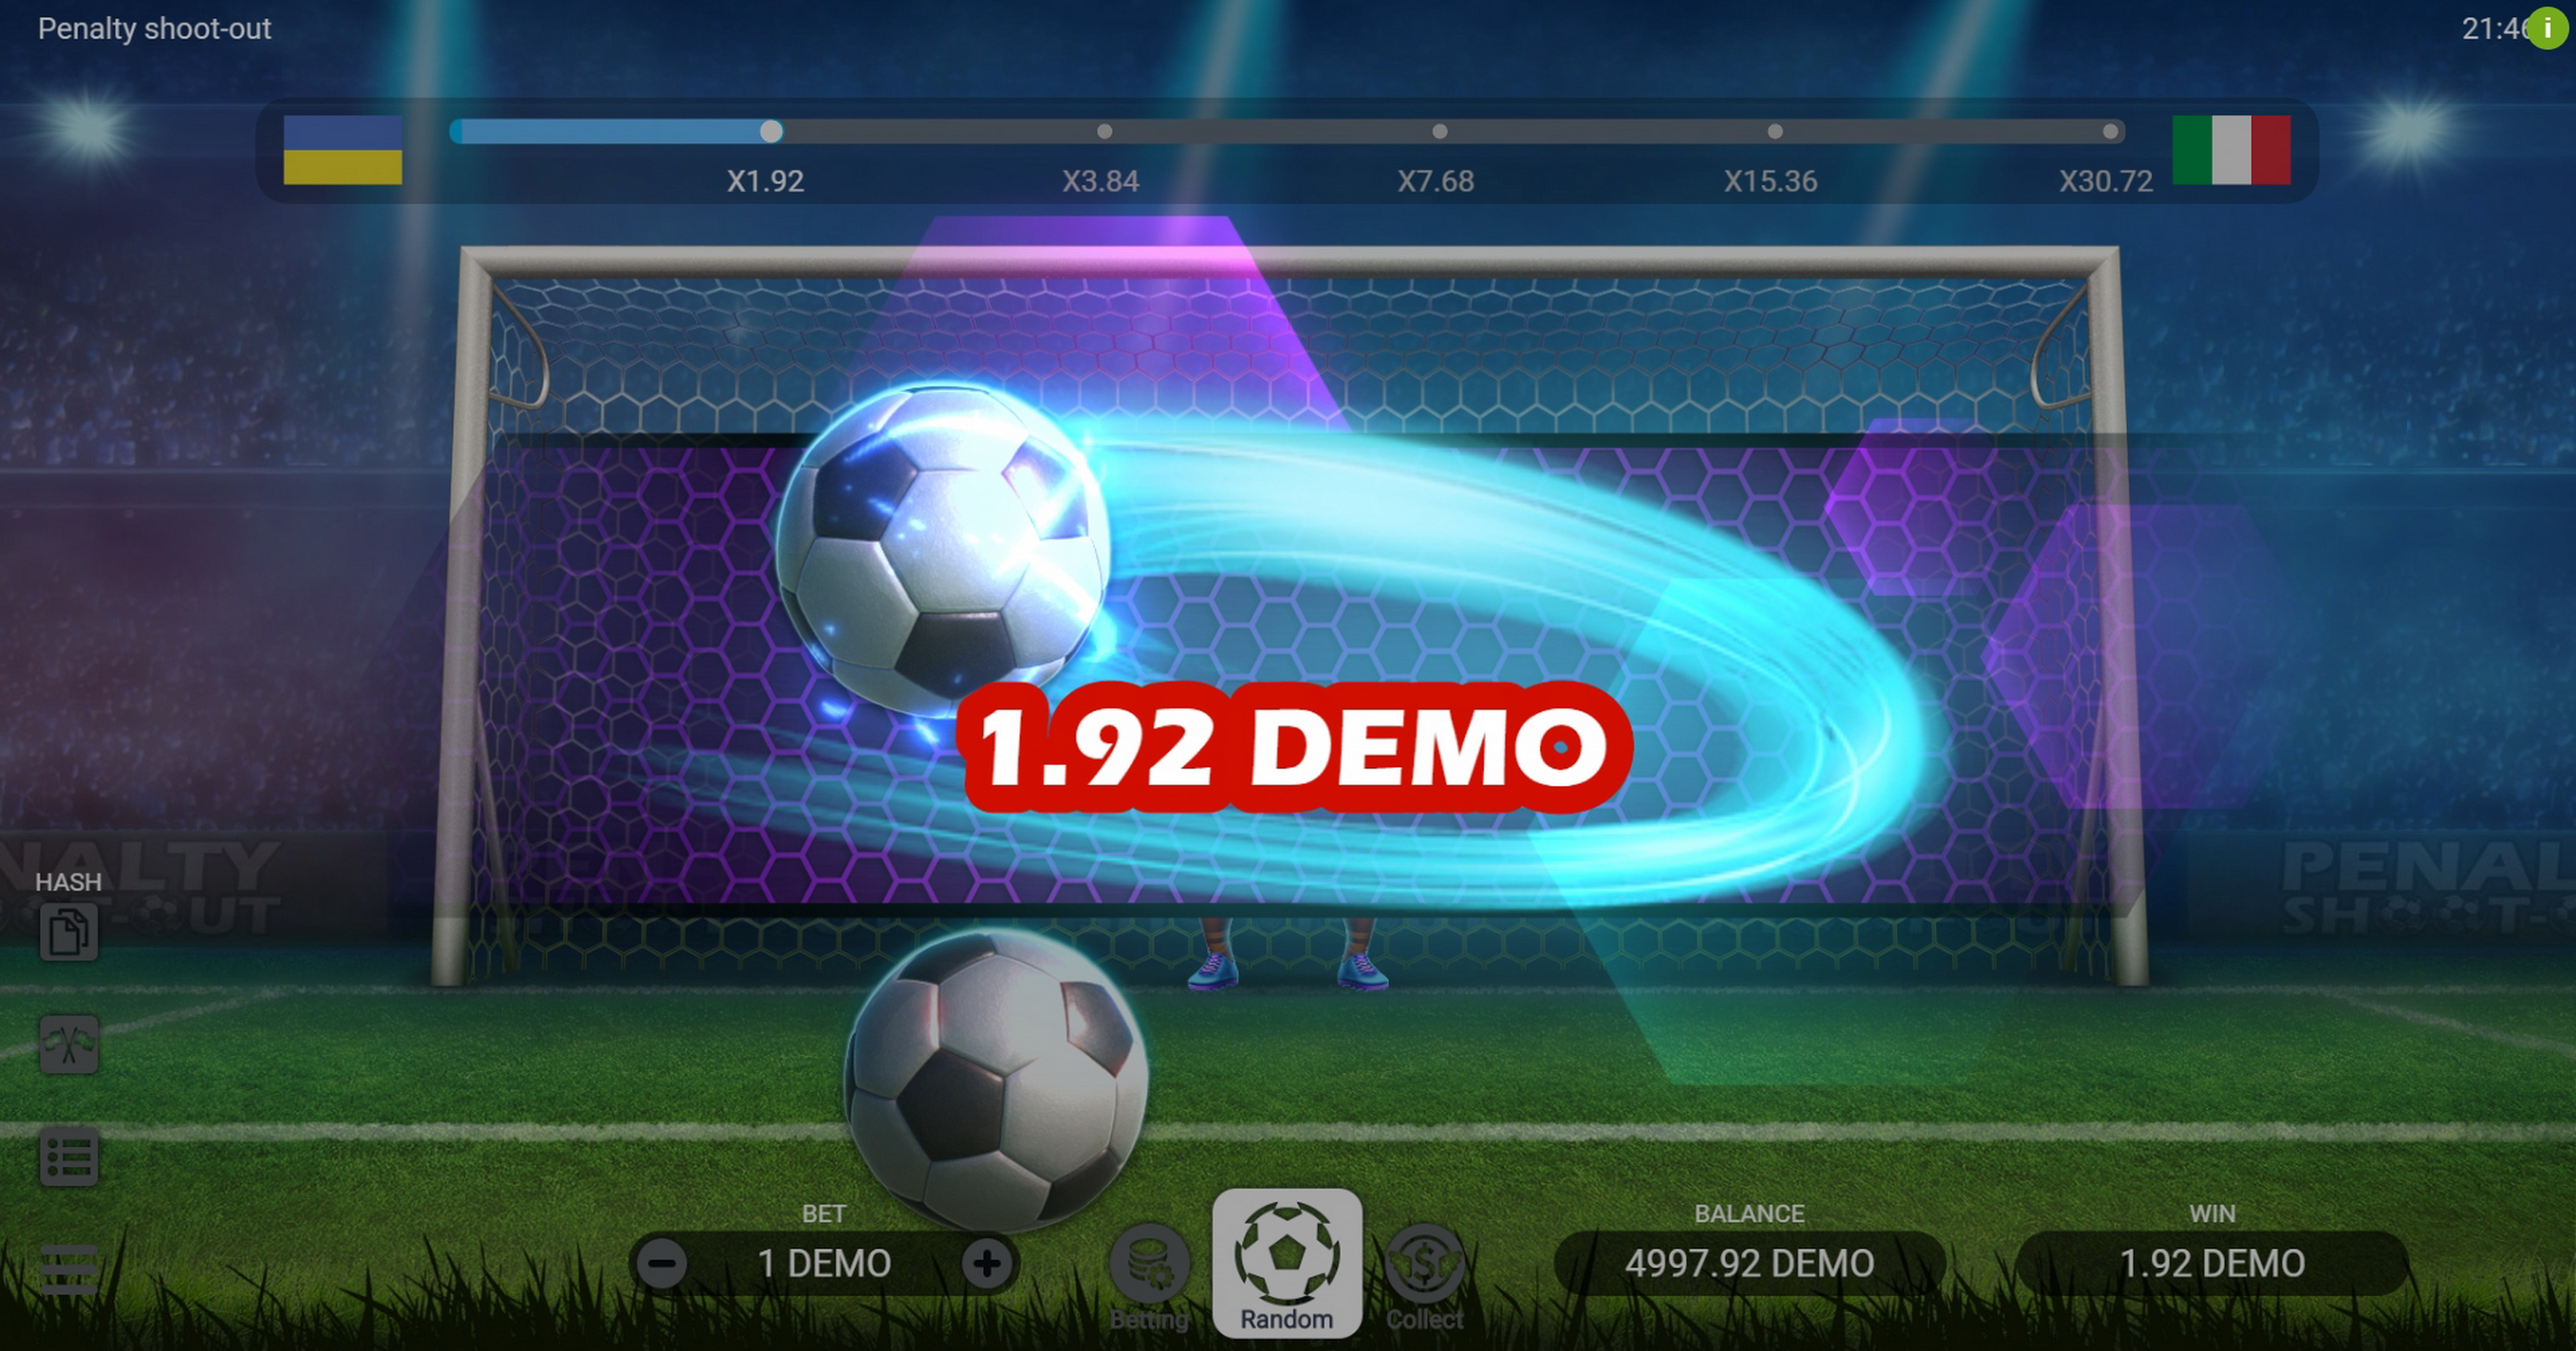 Win Money in Penalty Shoot Out Free Slot Game by Evoplay Entertainment